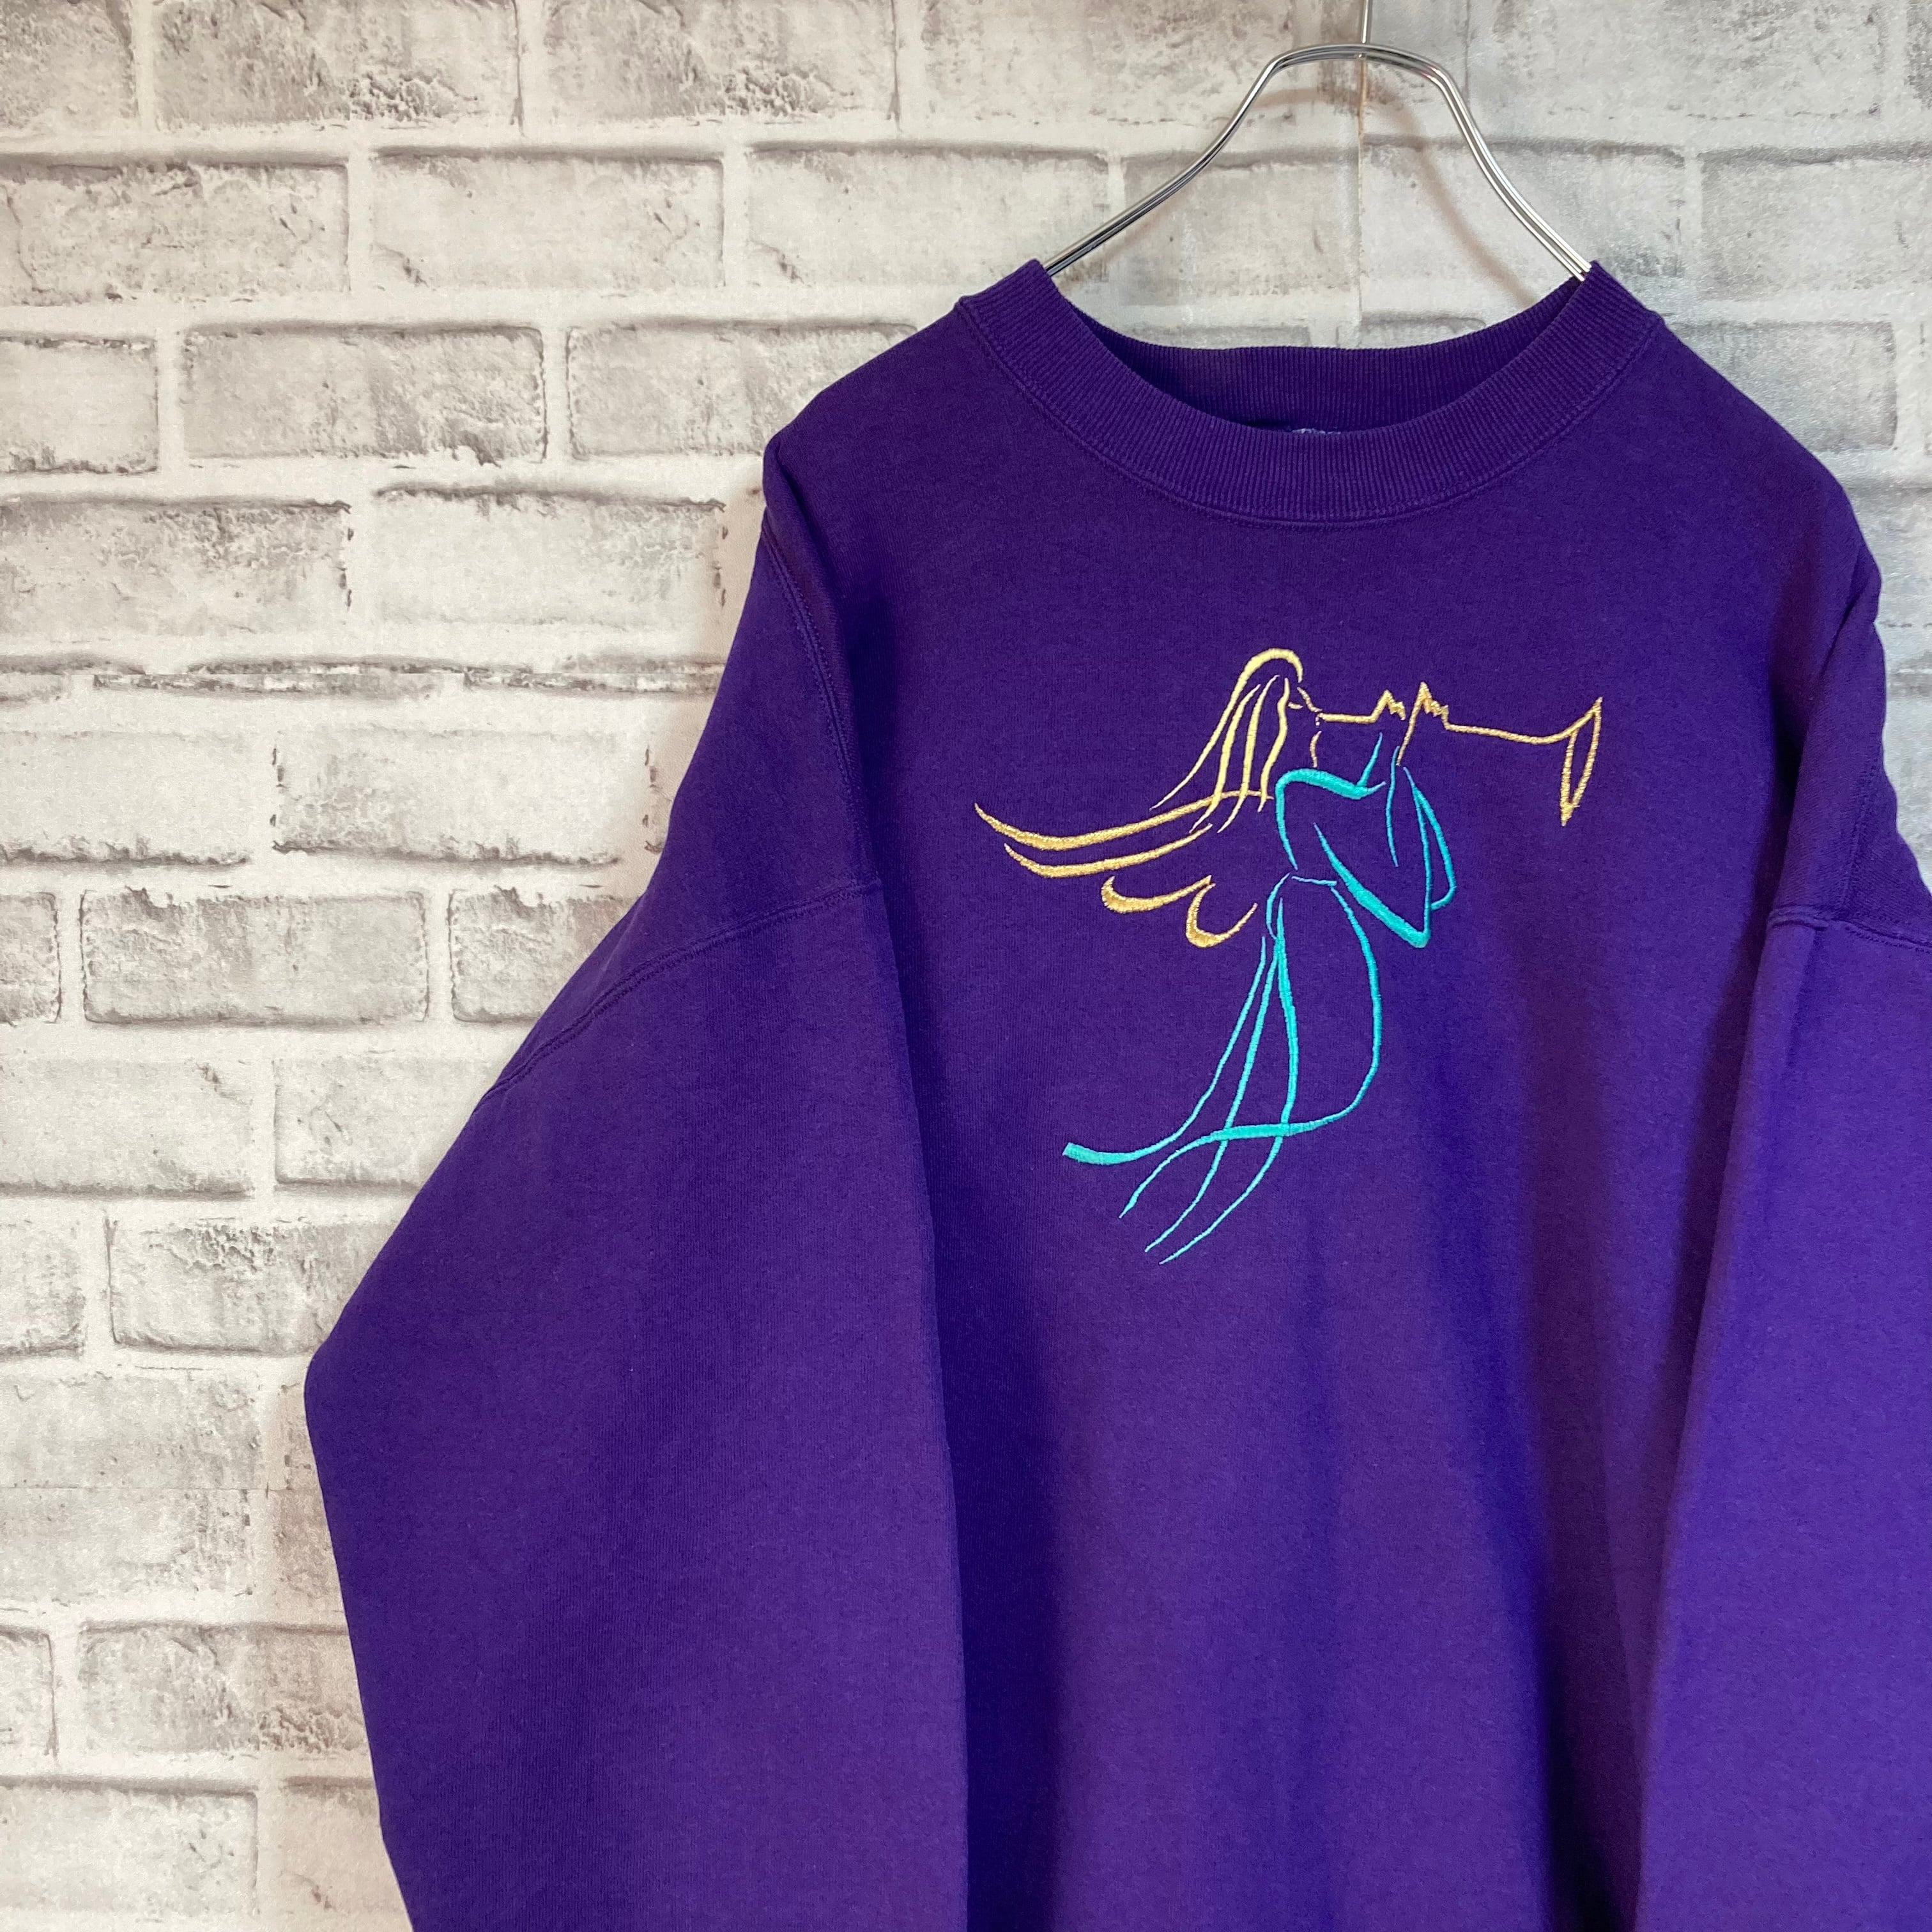 JERZEES】L/S Sweat XL 80s Made in USA アート系 スウェット 